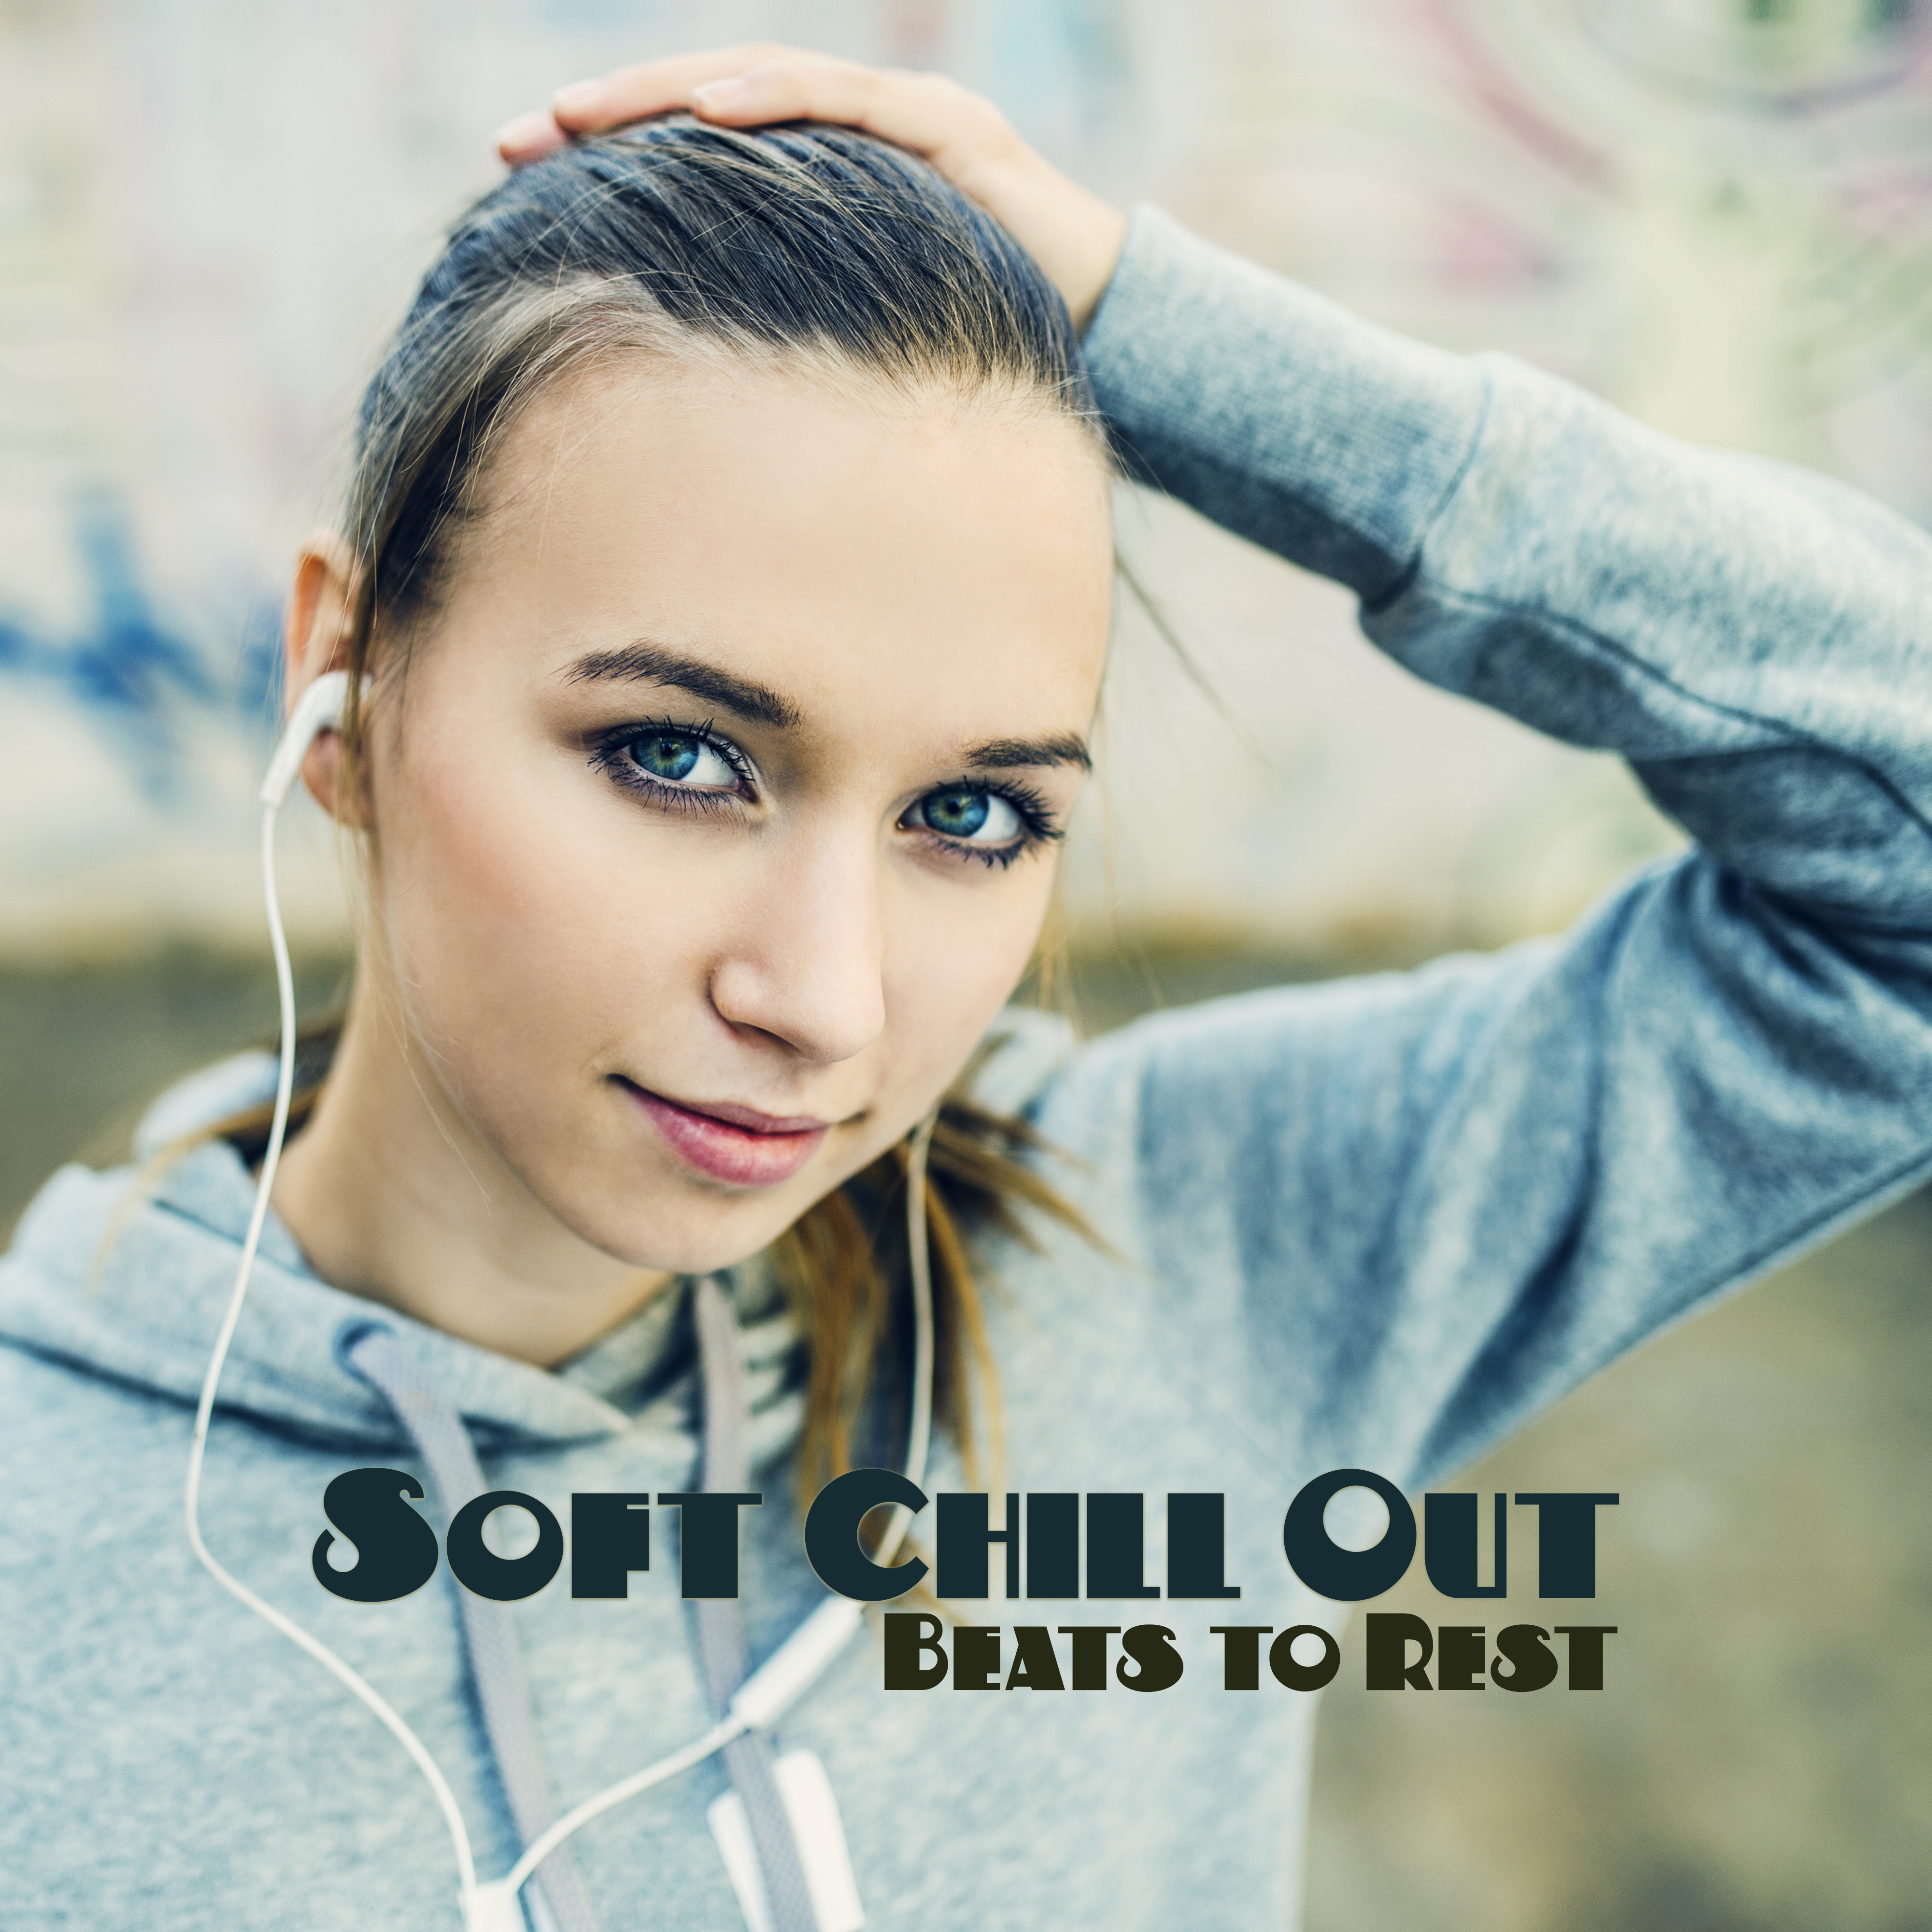 Soft Chill Out Beats to Rest – Calm Down & Relax, Peaceful Melodies, Chill Out Relaxation